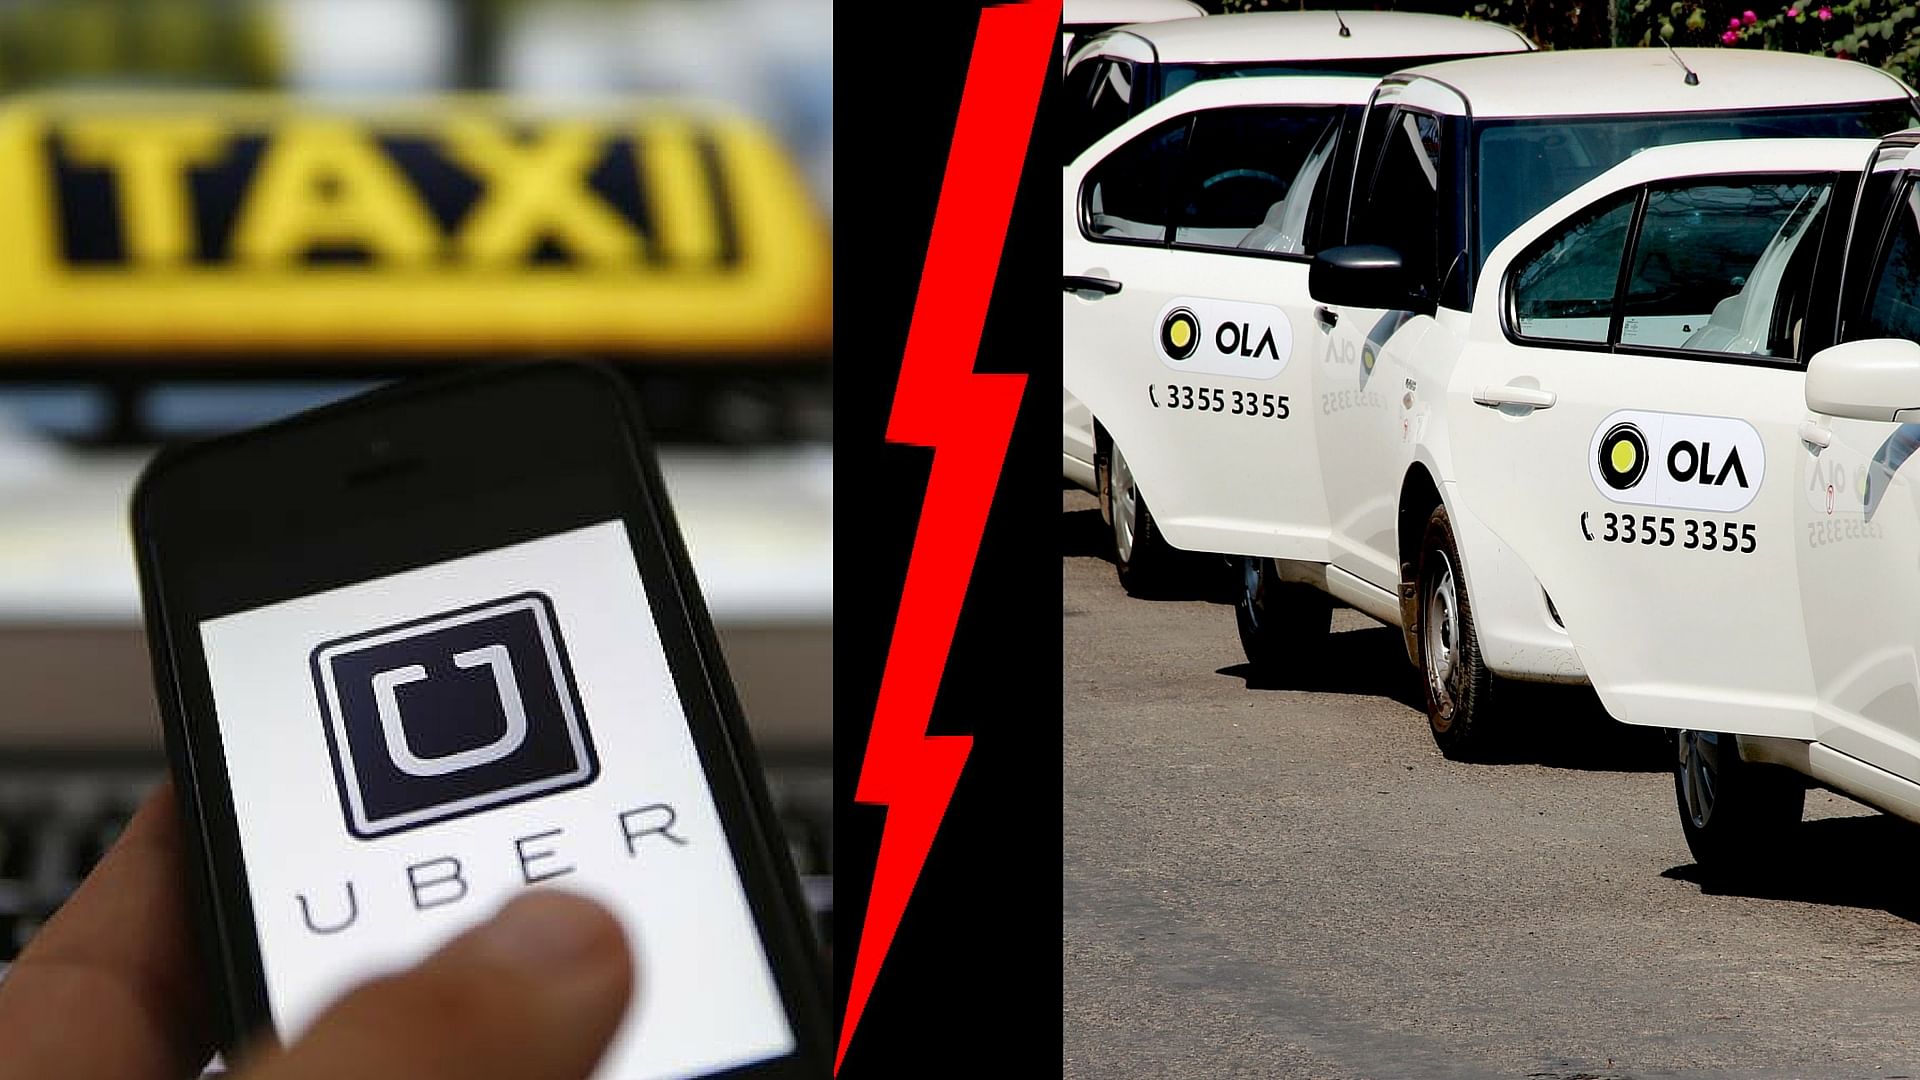 Uber and Ola are involved in a showdown. (Photo: TheQuint)